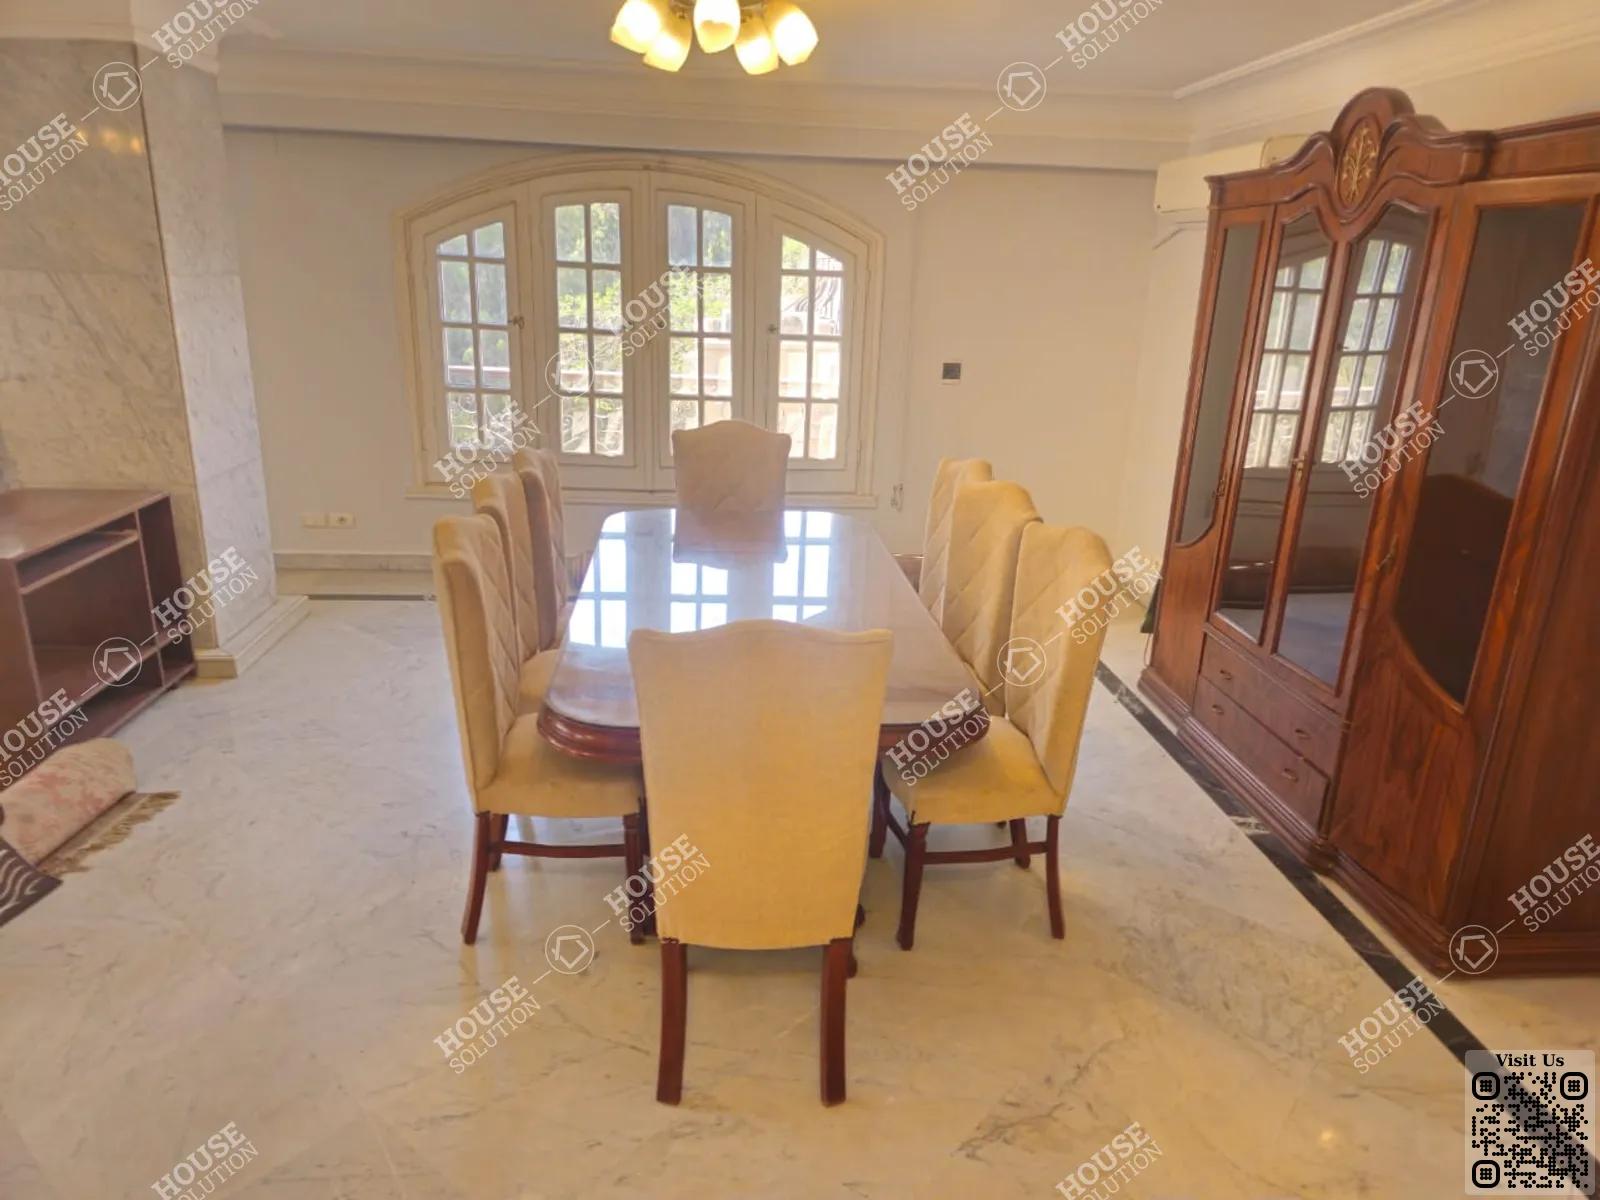 DINING AREA @ Apartments For Rent In Maadi Maadi Sarayat Area: 325 m² consists of 4 Bedrooms 4 Bathrooms Modern furnished 5 stars #5883-2